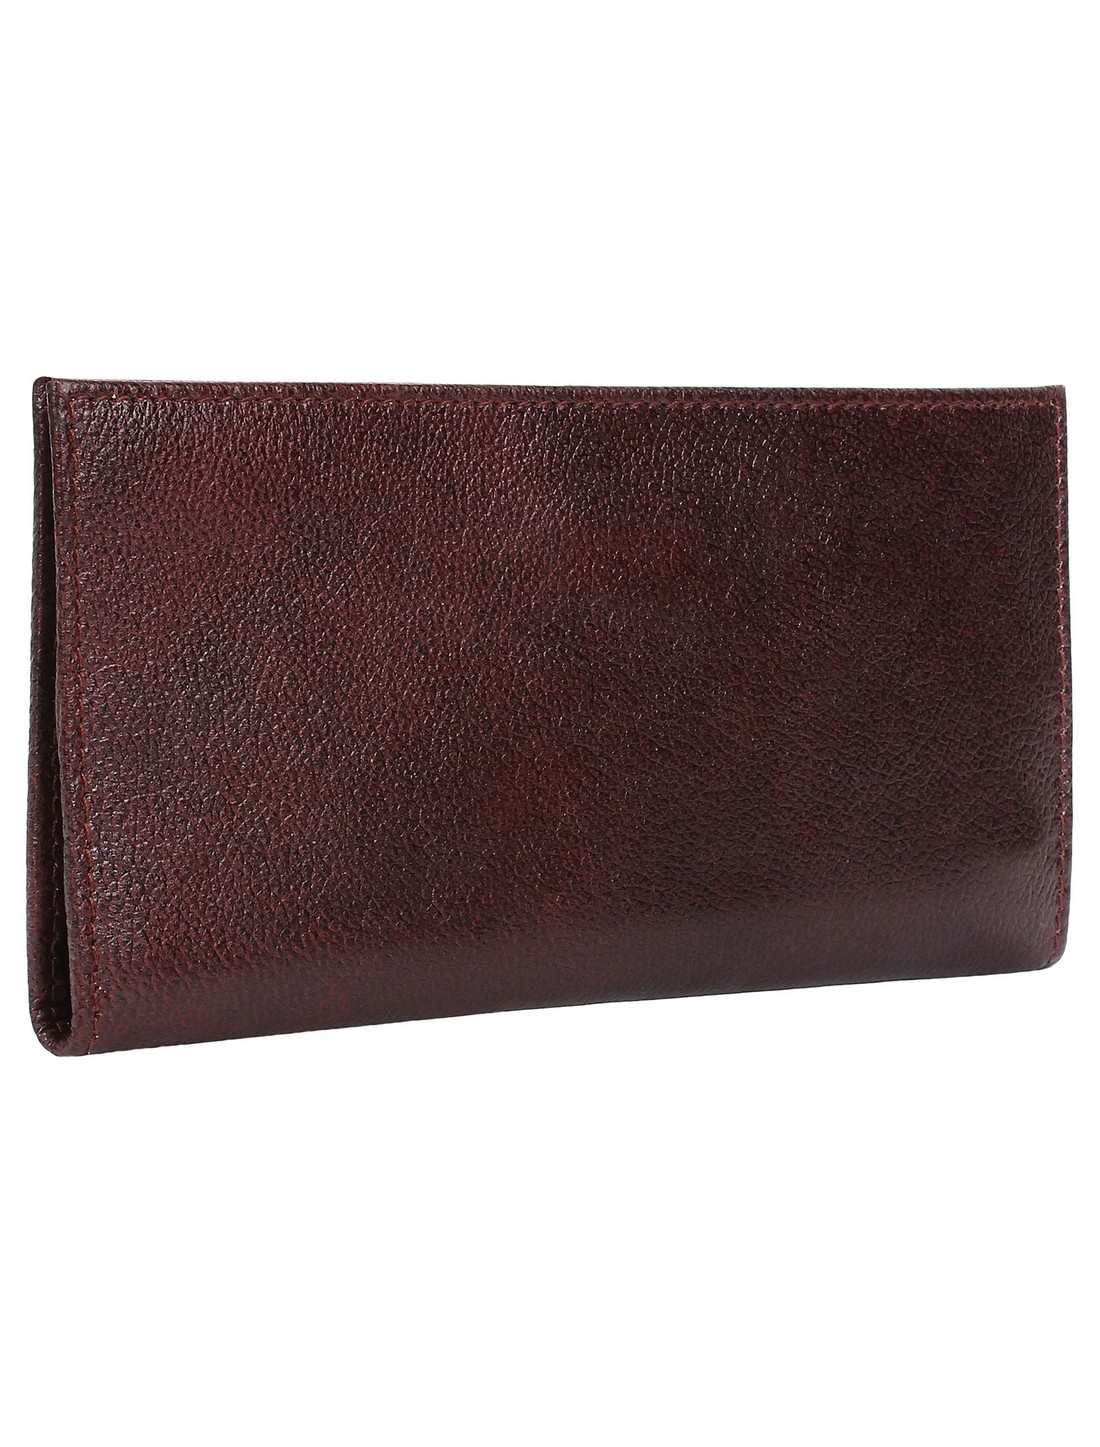 CREATURE | CREATURE Brown Stylish Genuine Leather Clutch for Women